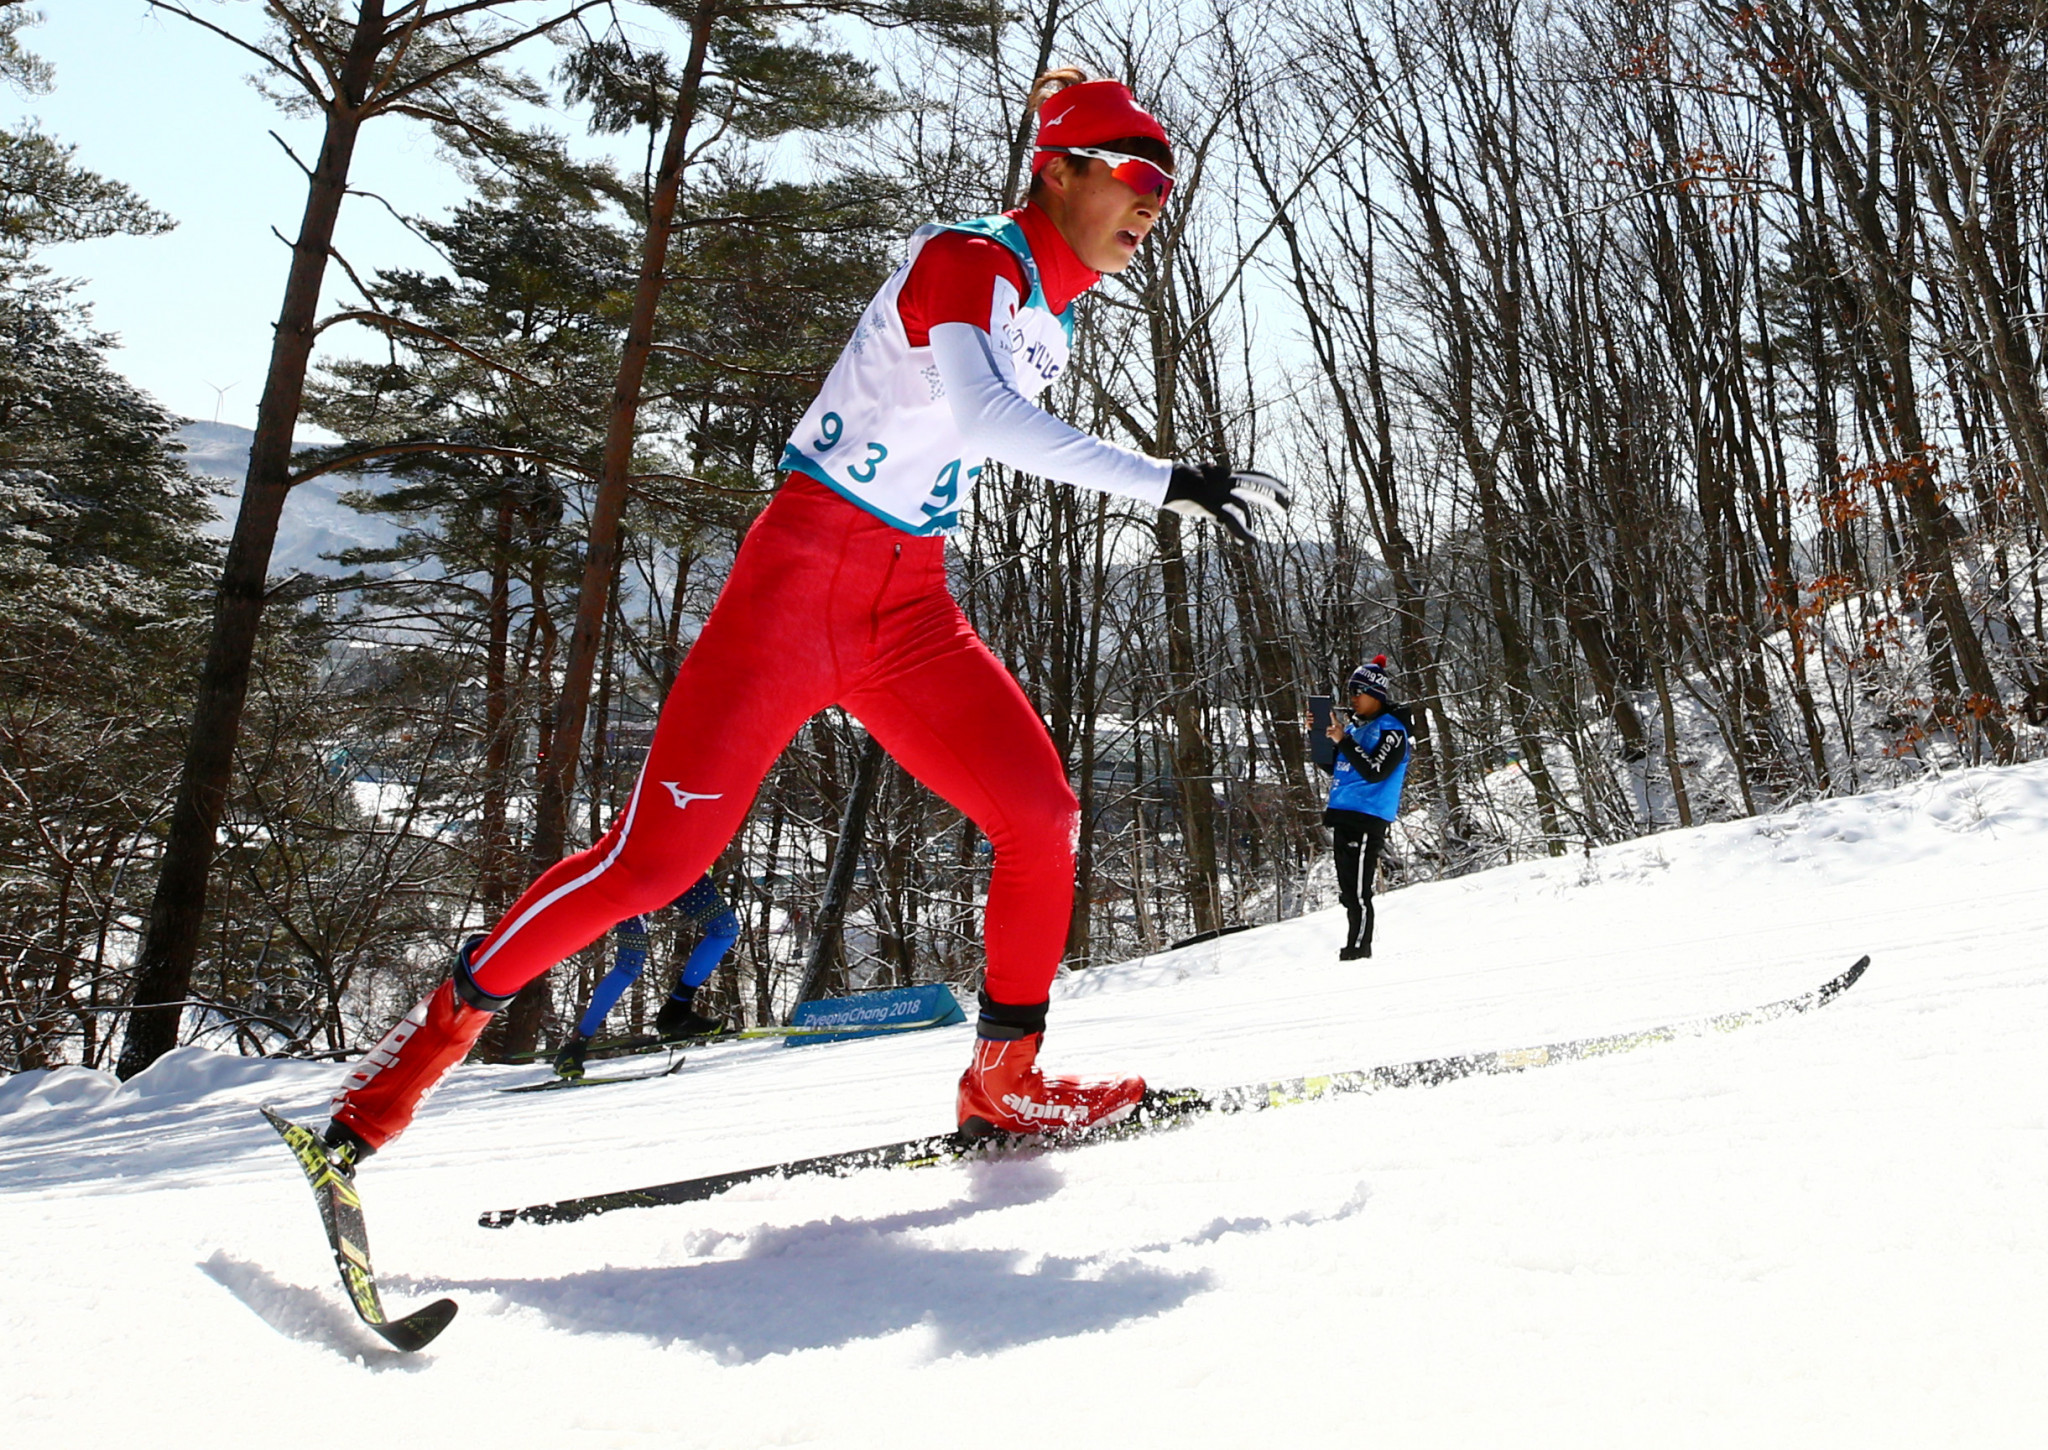 Kawayoke to lead hosts Japan's charge at World Para Nordic Skiing World Cup Finals in Sapporo